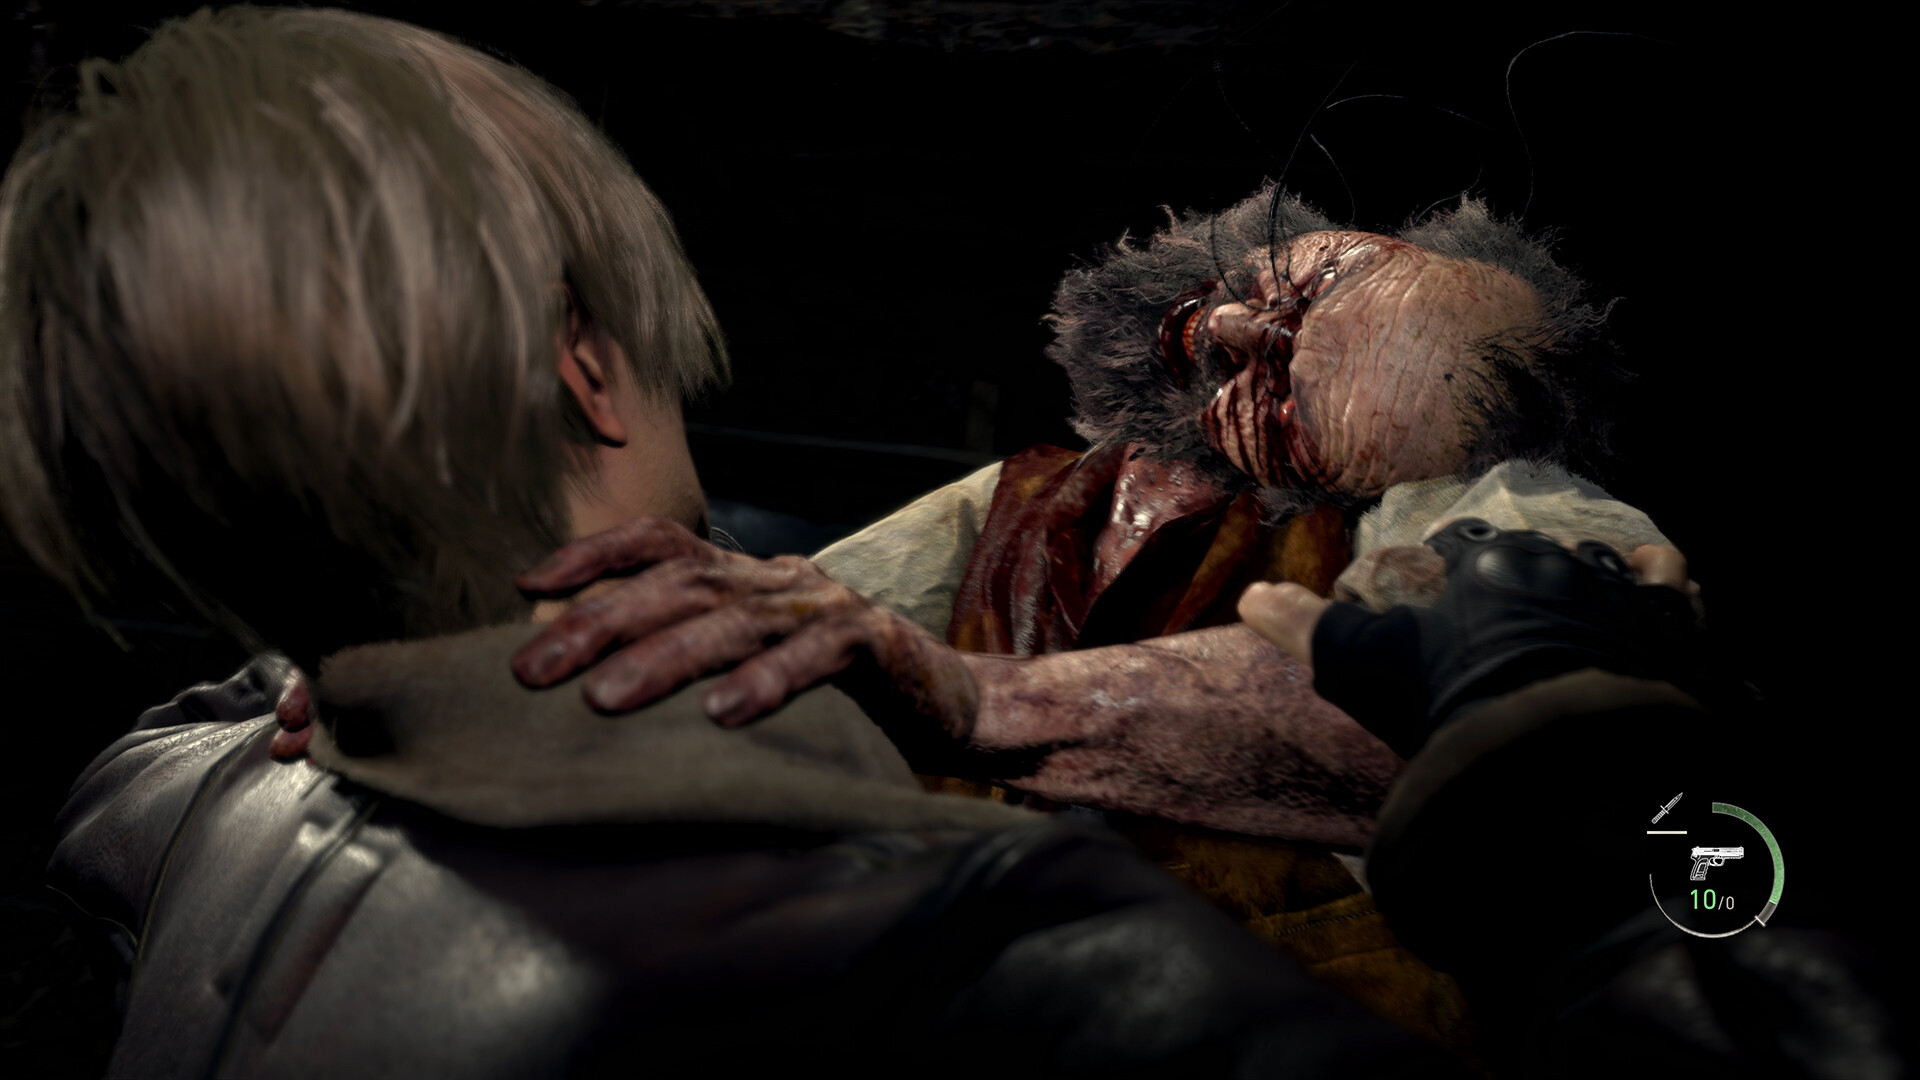 Resident Evil 4 Remake Review: A Masterclass in Survival Horror